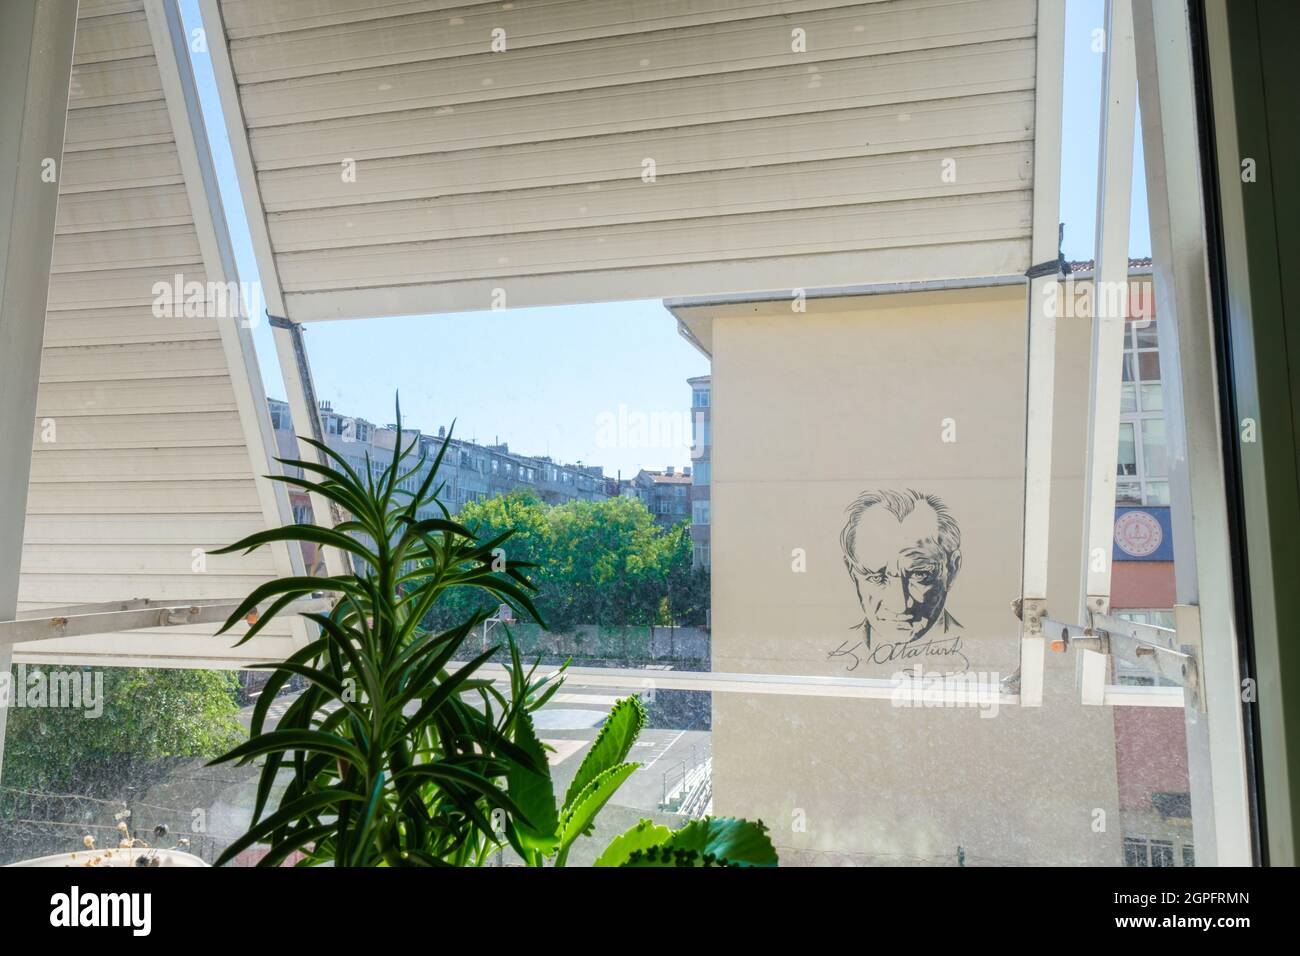 Findikzade, Istanbul, Turkey - 07.16.2021: Mustafa Kemal Ataturk, founder of Turkey Republic, signature and drawing picture on a school building from Stock Photo